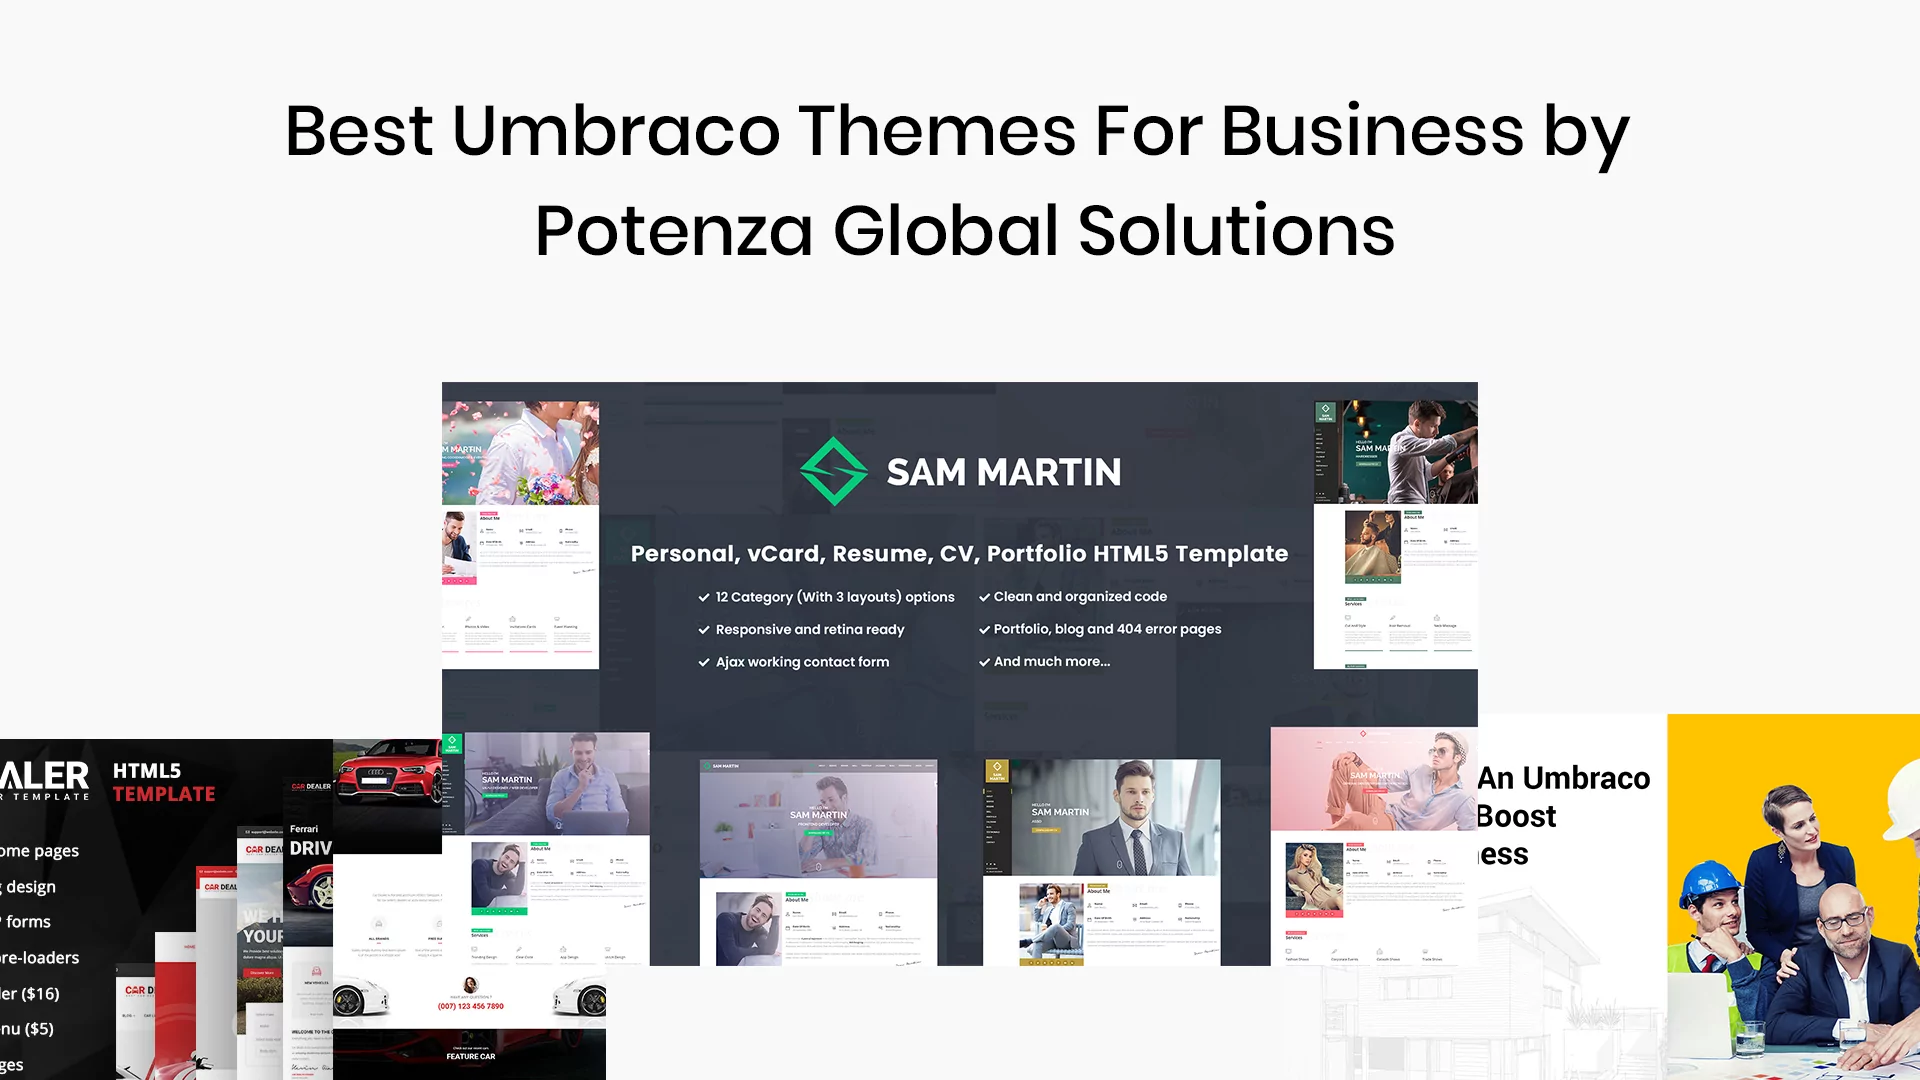 Best Umbraco Themes For business by Potenza Global Solutions